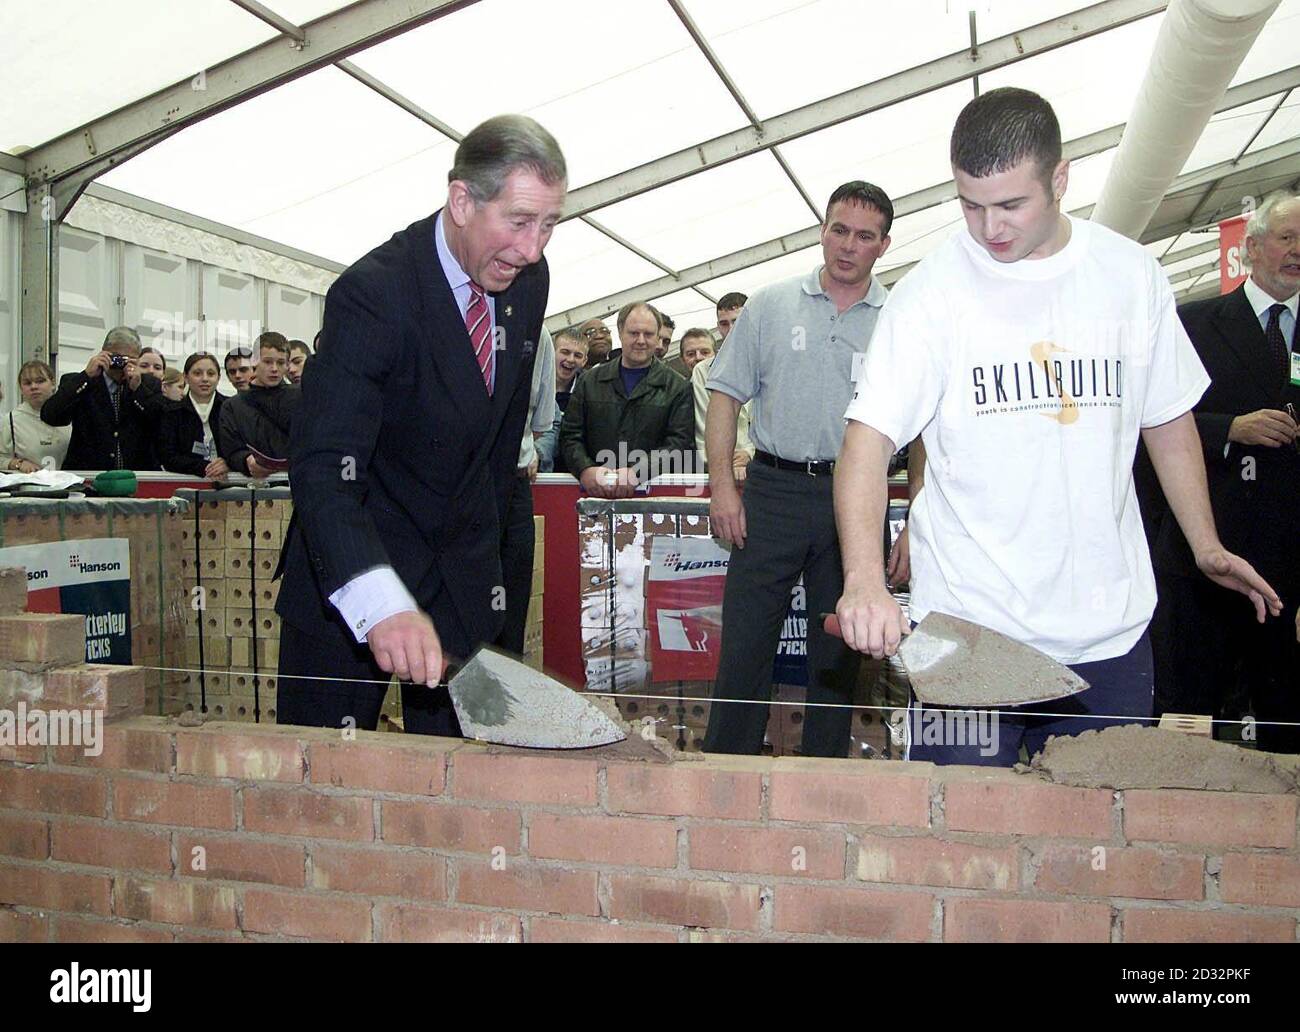 The Prince of Wales, on his 54th birthday, tries his hand at bricklaying during a visit, to a vocational careers' fair in Salford, Greater Manchester.    *...Earlier, he had ridden on a Segway an invention, which looks like an electric scooter, and uses a high-tech system of gyroscopes to detect the user's natural sense of balance to steer it. Stock Photo